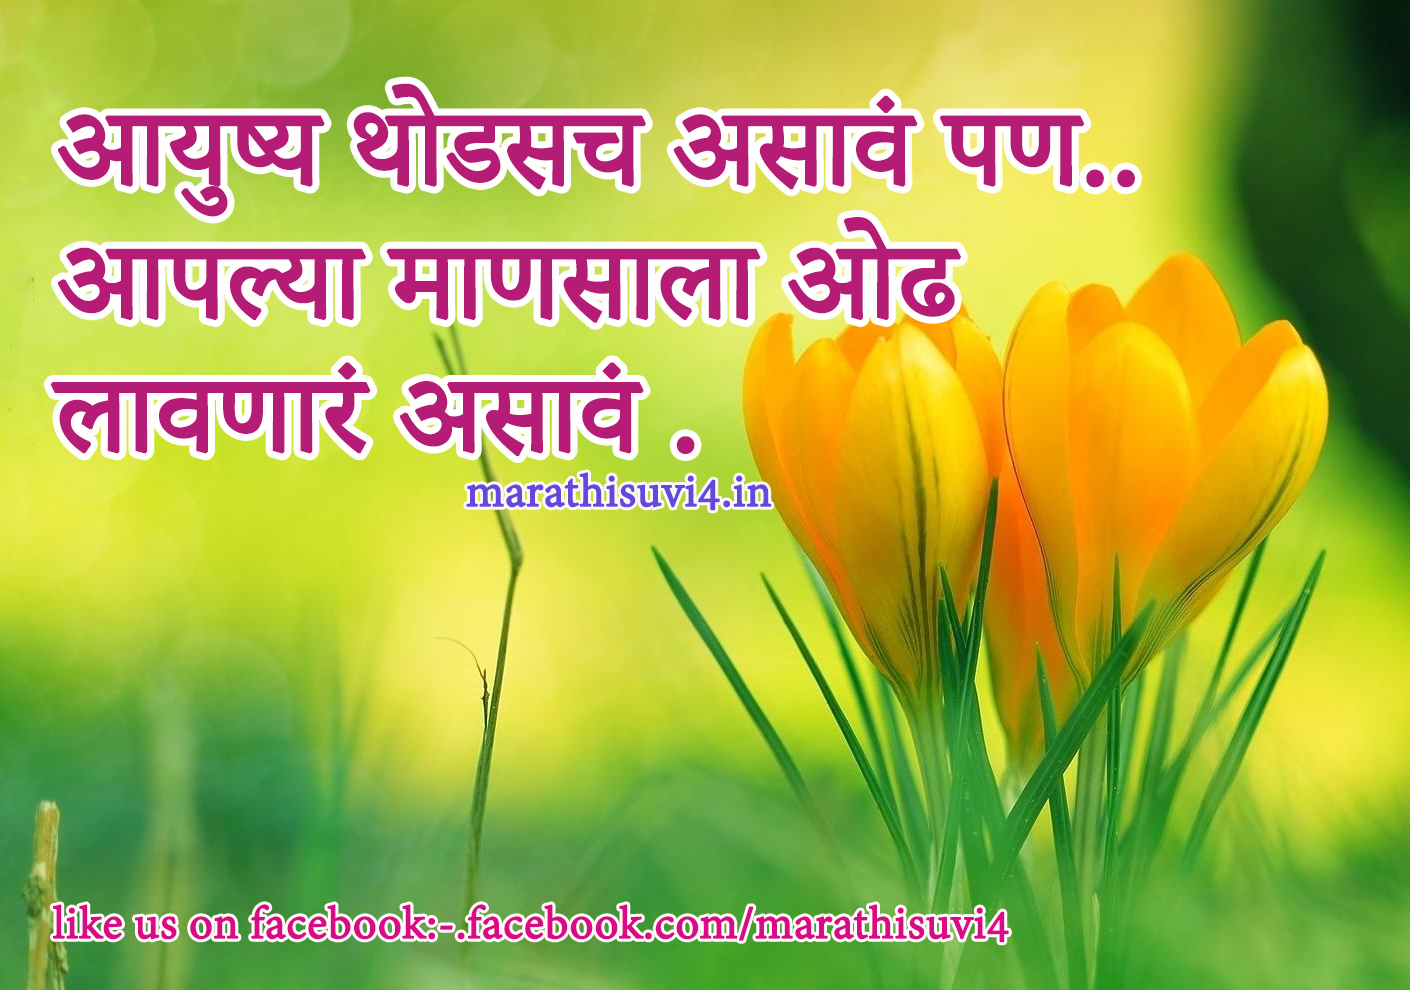 how should life be live quotes in marathi the best life quote collection with fun images Quotes About Life marathi english indian languages and